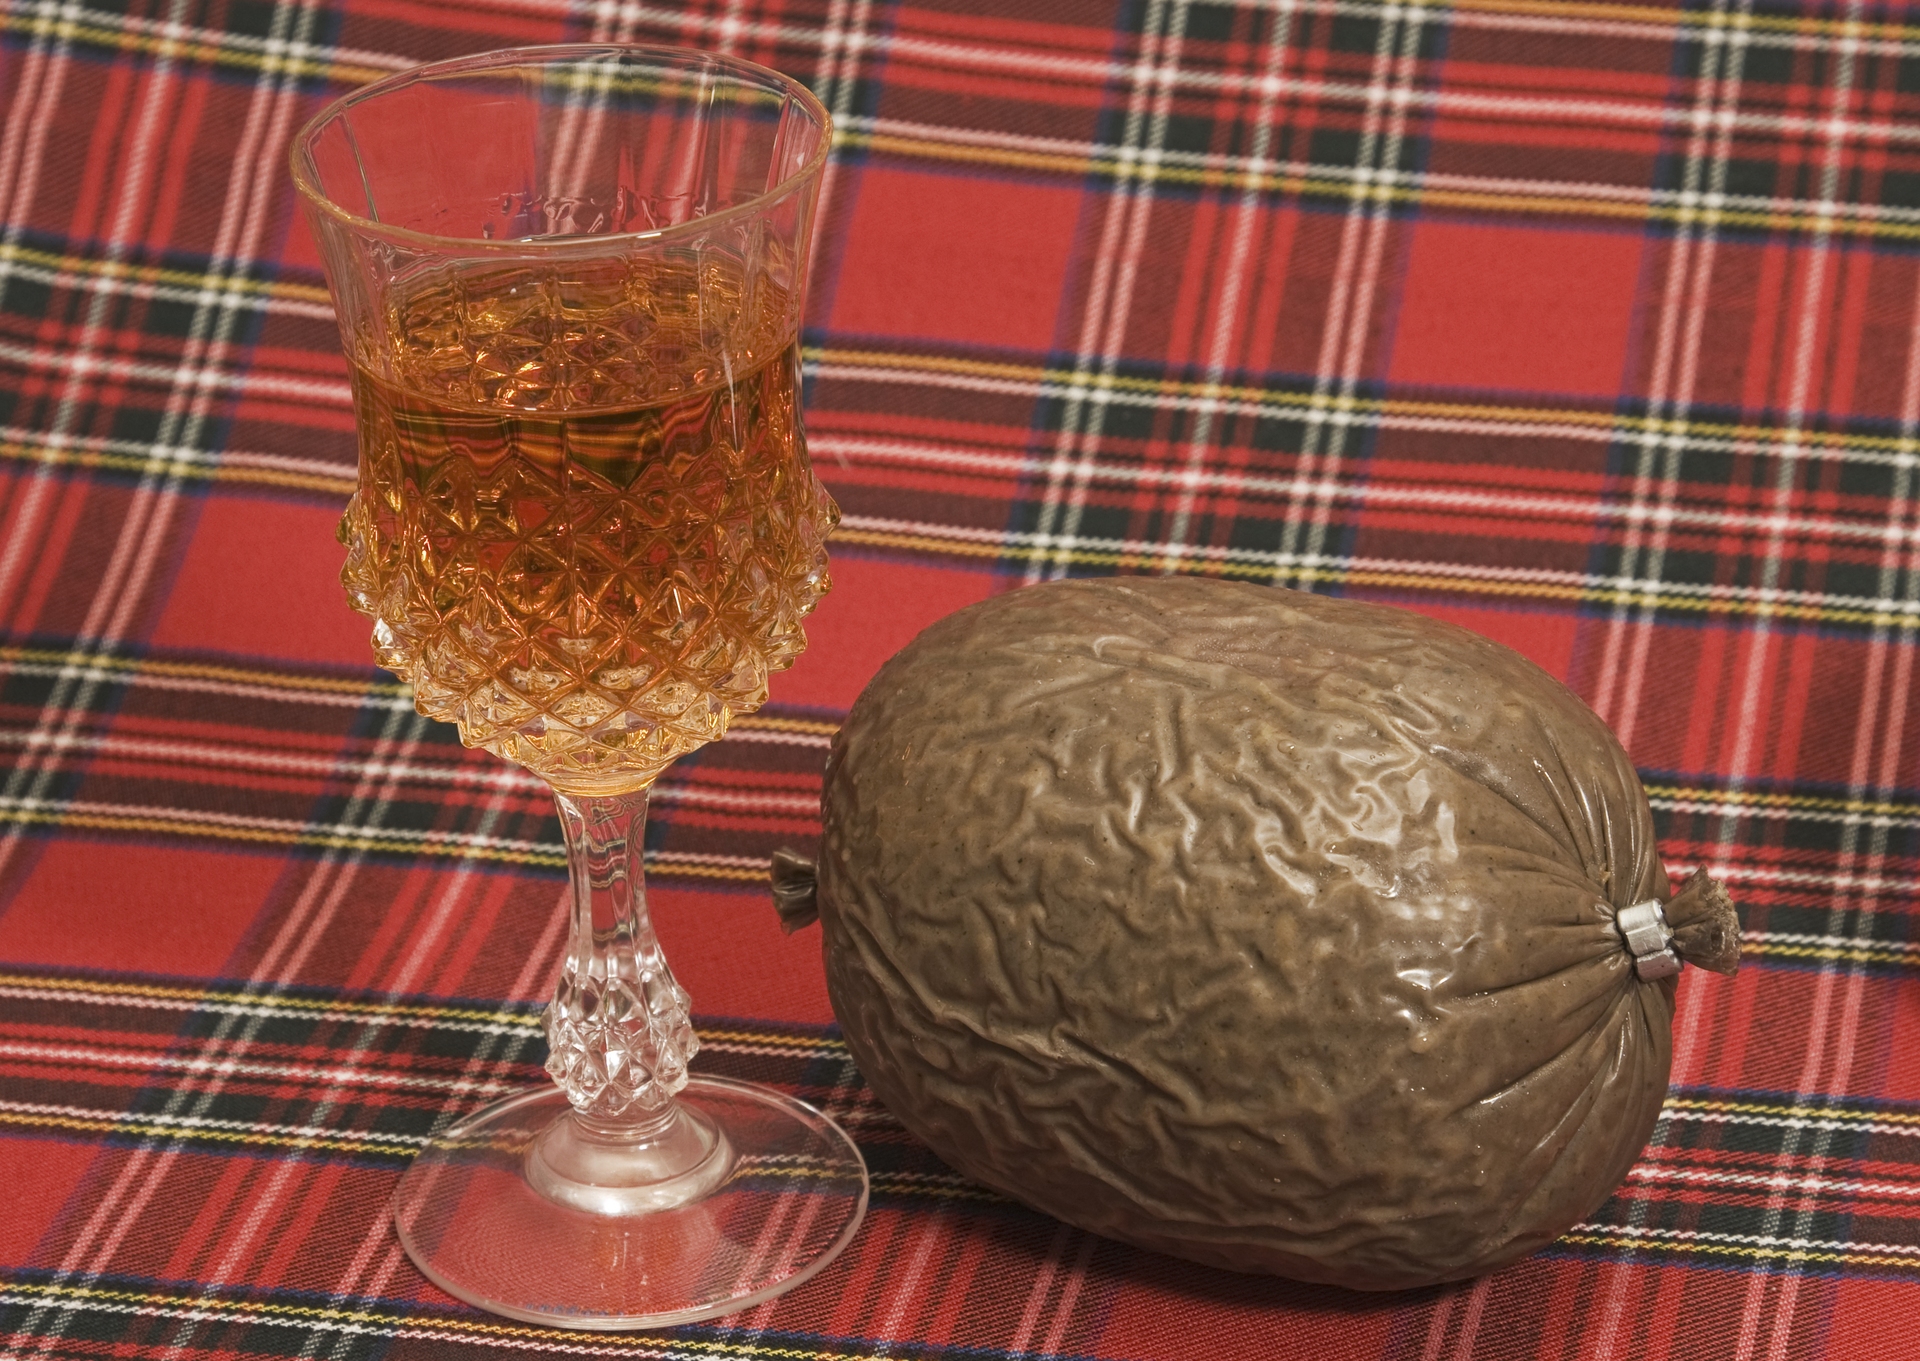 Tartan, whisky and haggis - sterotypically Scottish.